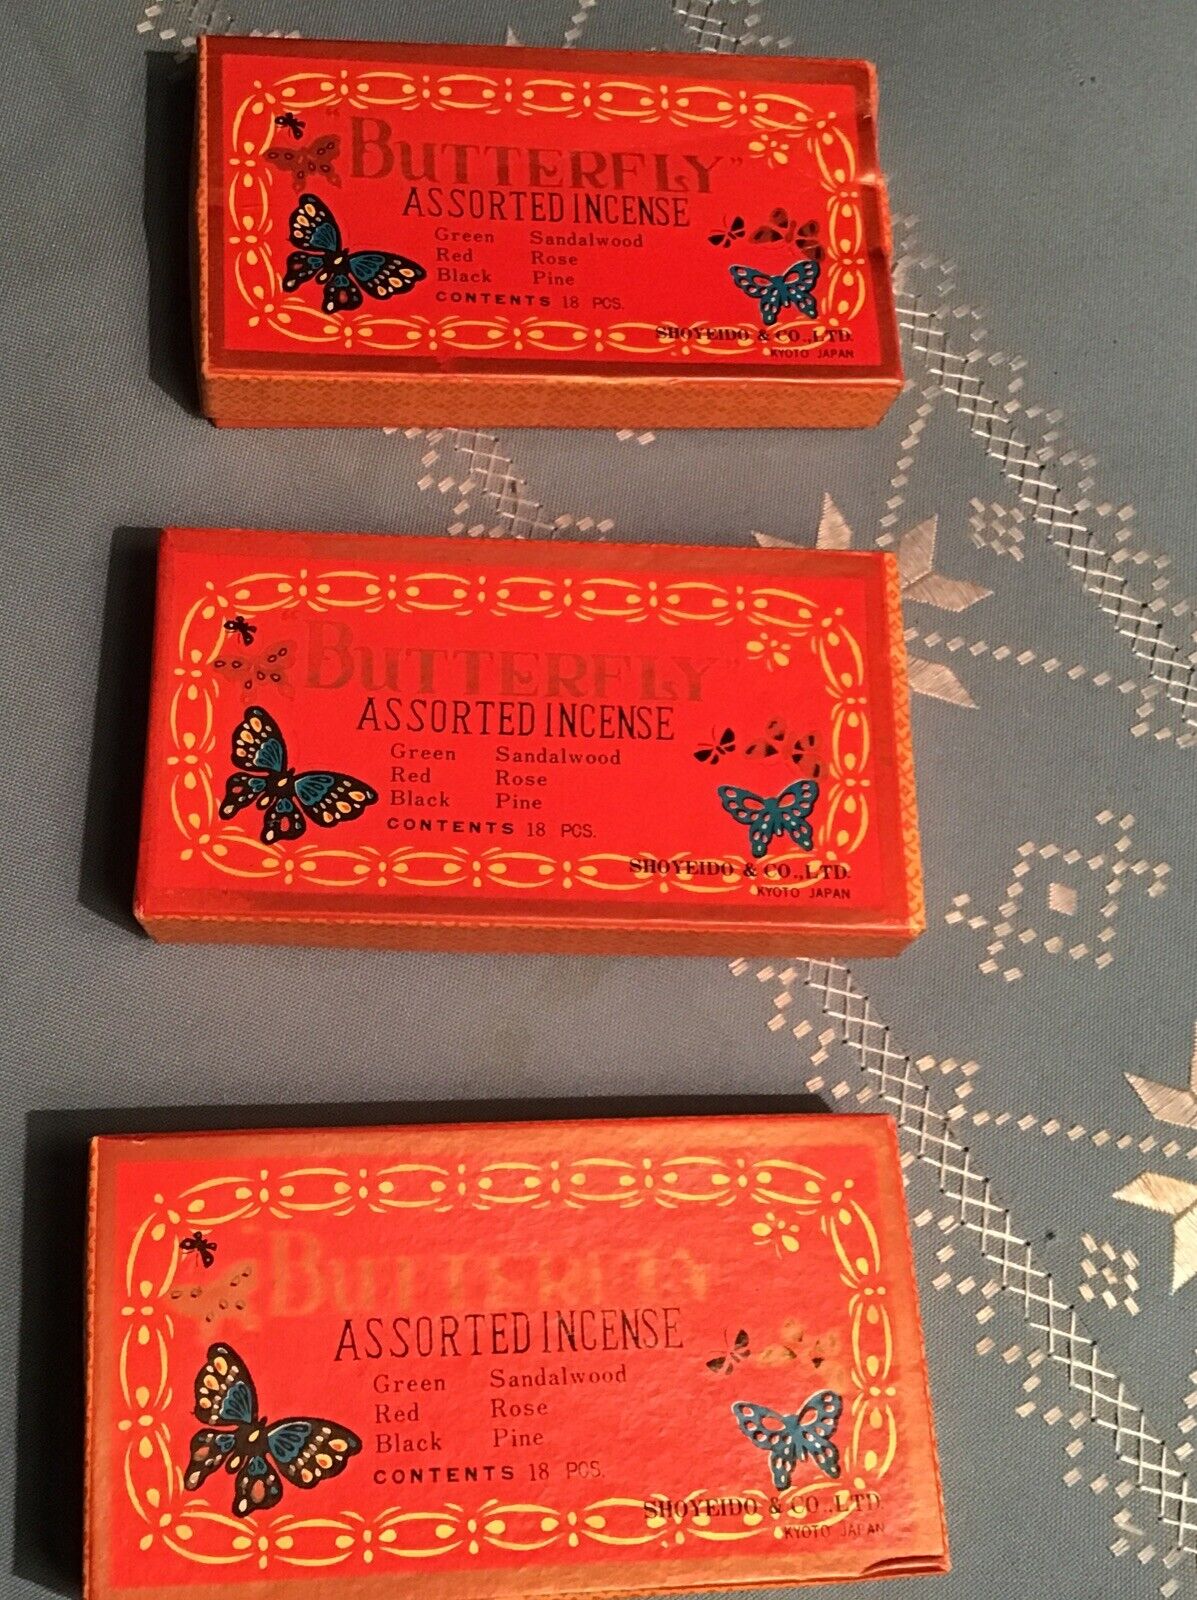 Nice Lot 3 Boxes Vintage 60’s Butterfly Assorted Incense Kyoto Japan